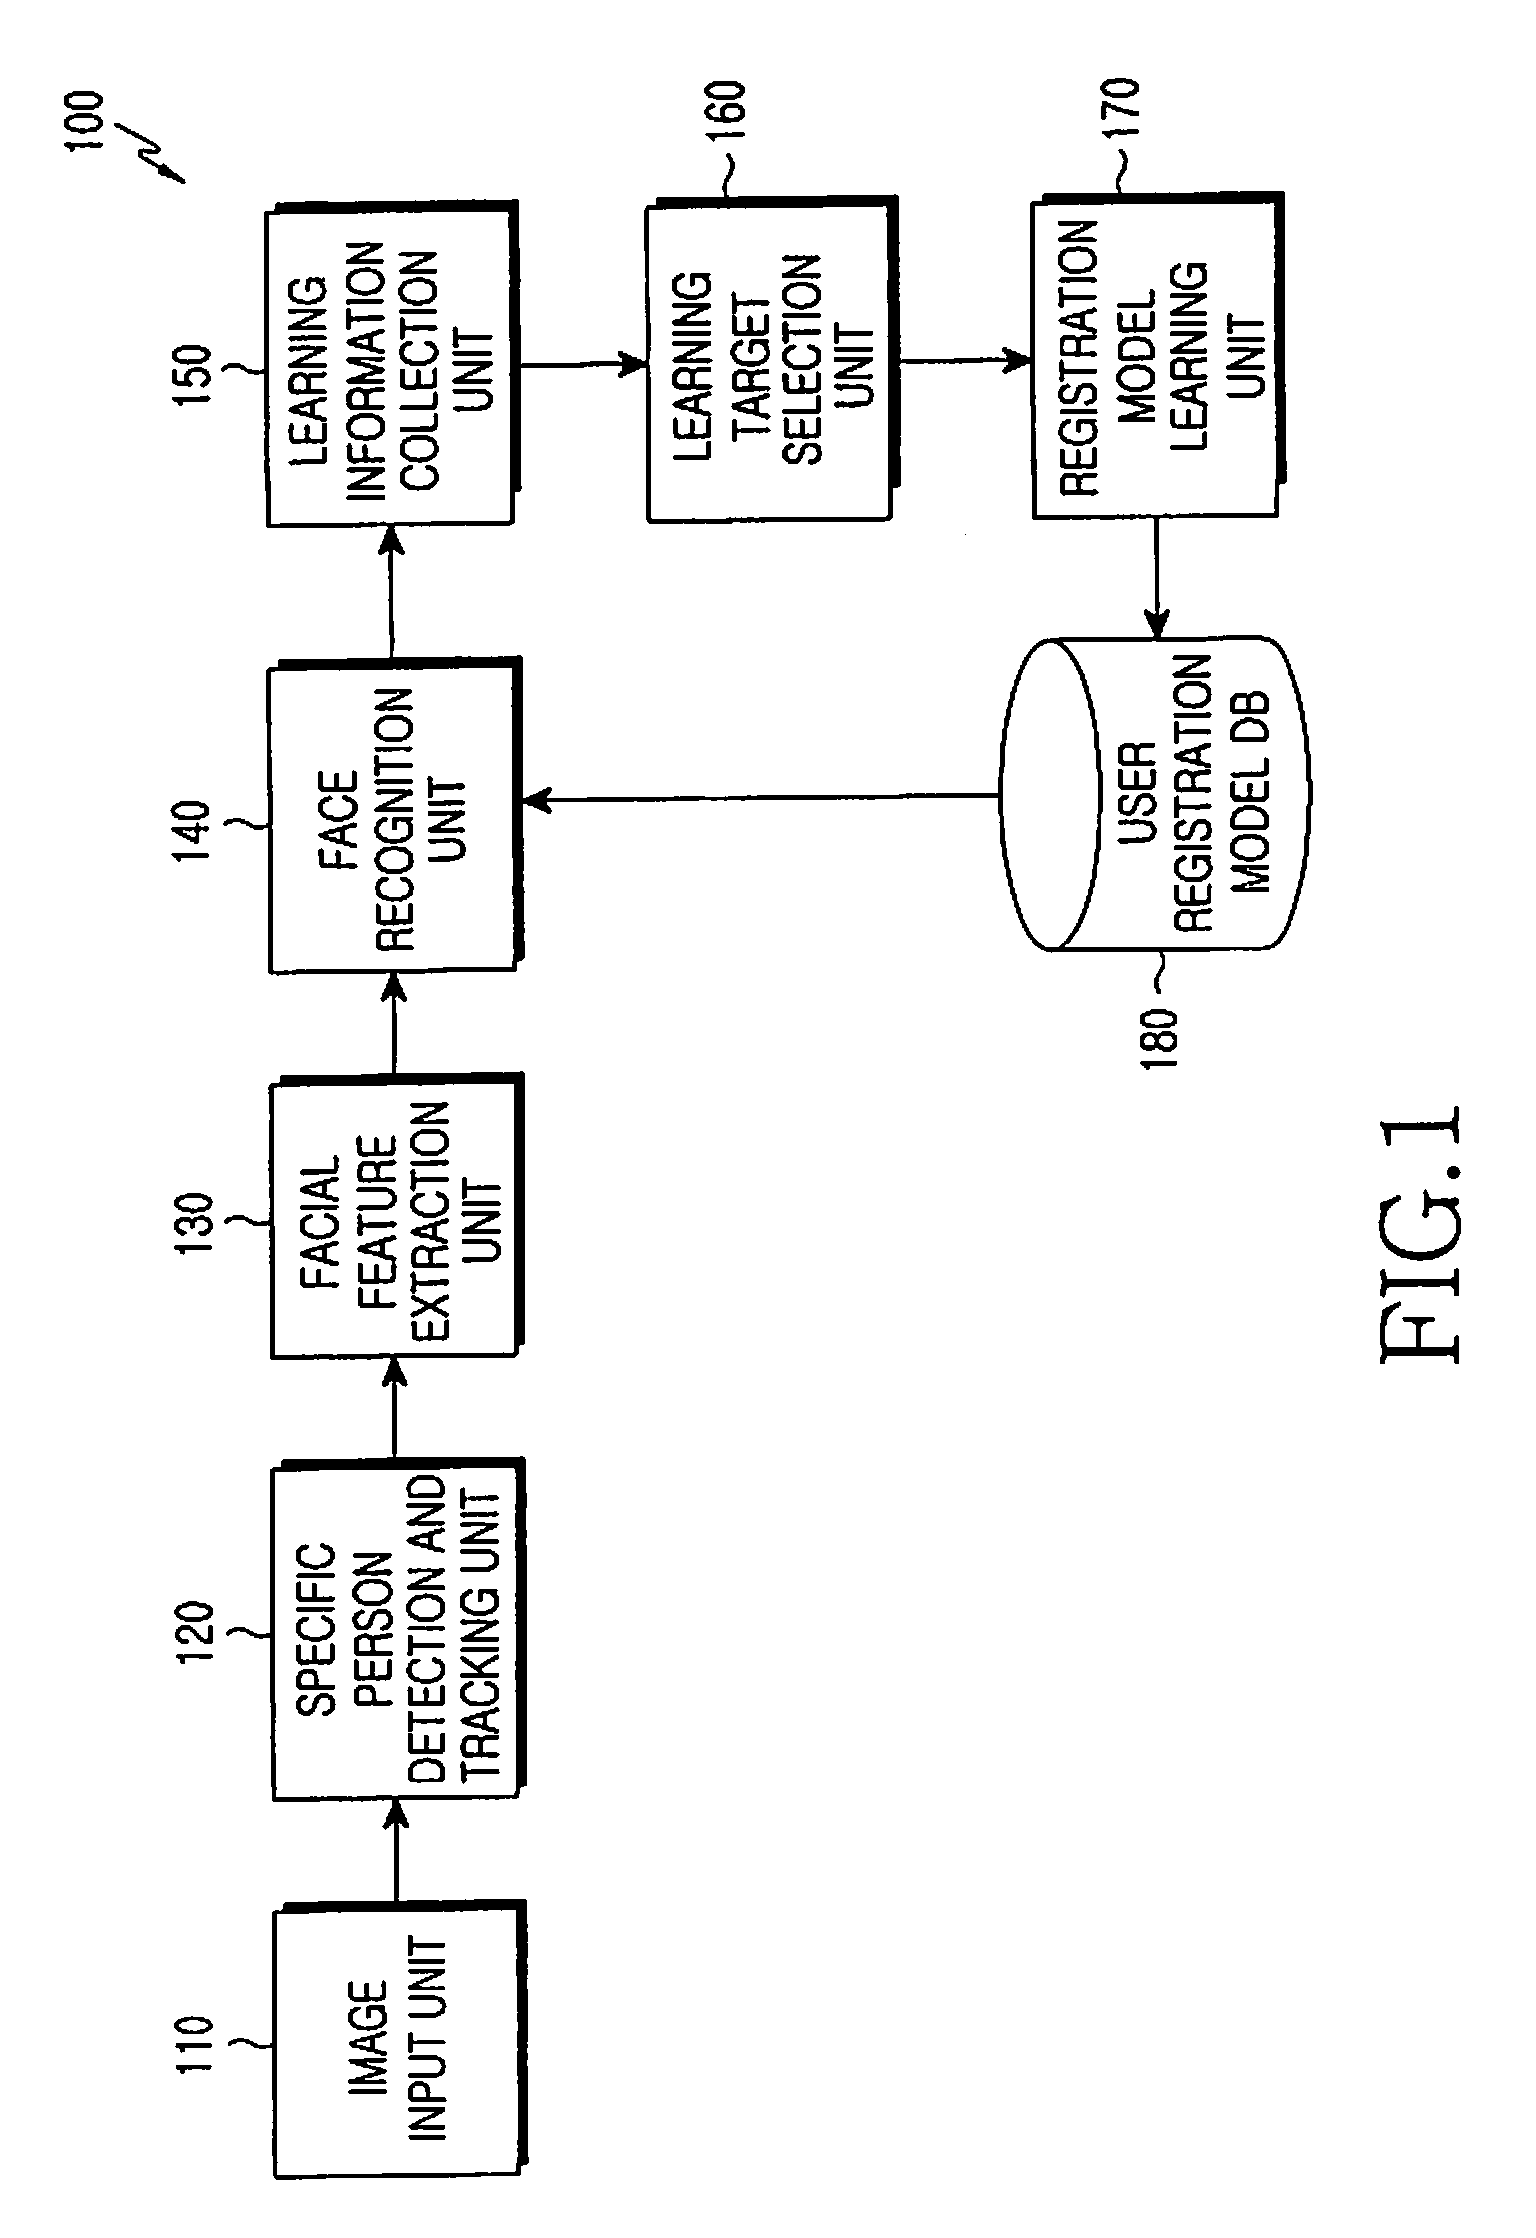 Face recognition system and method based on adaptive learning